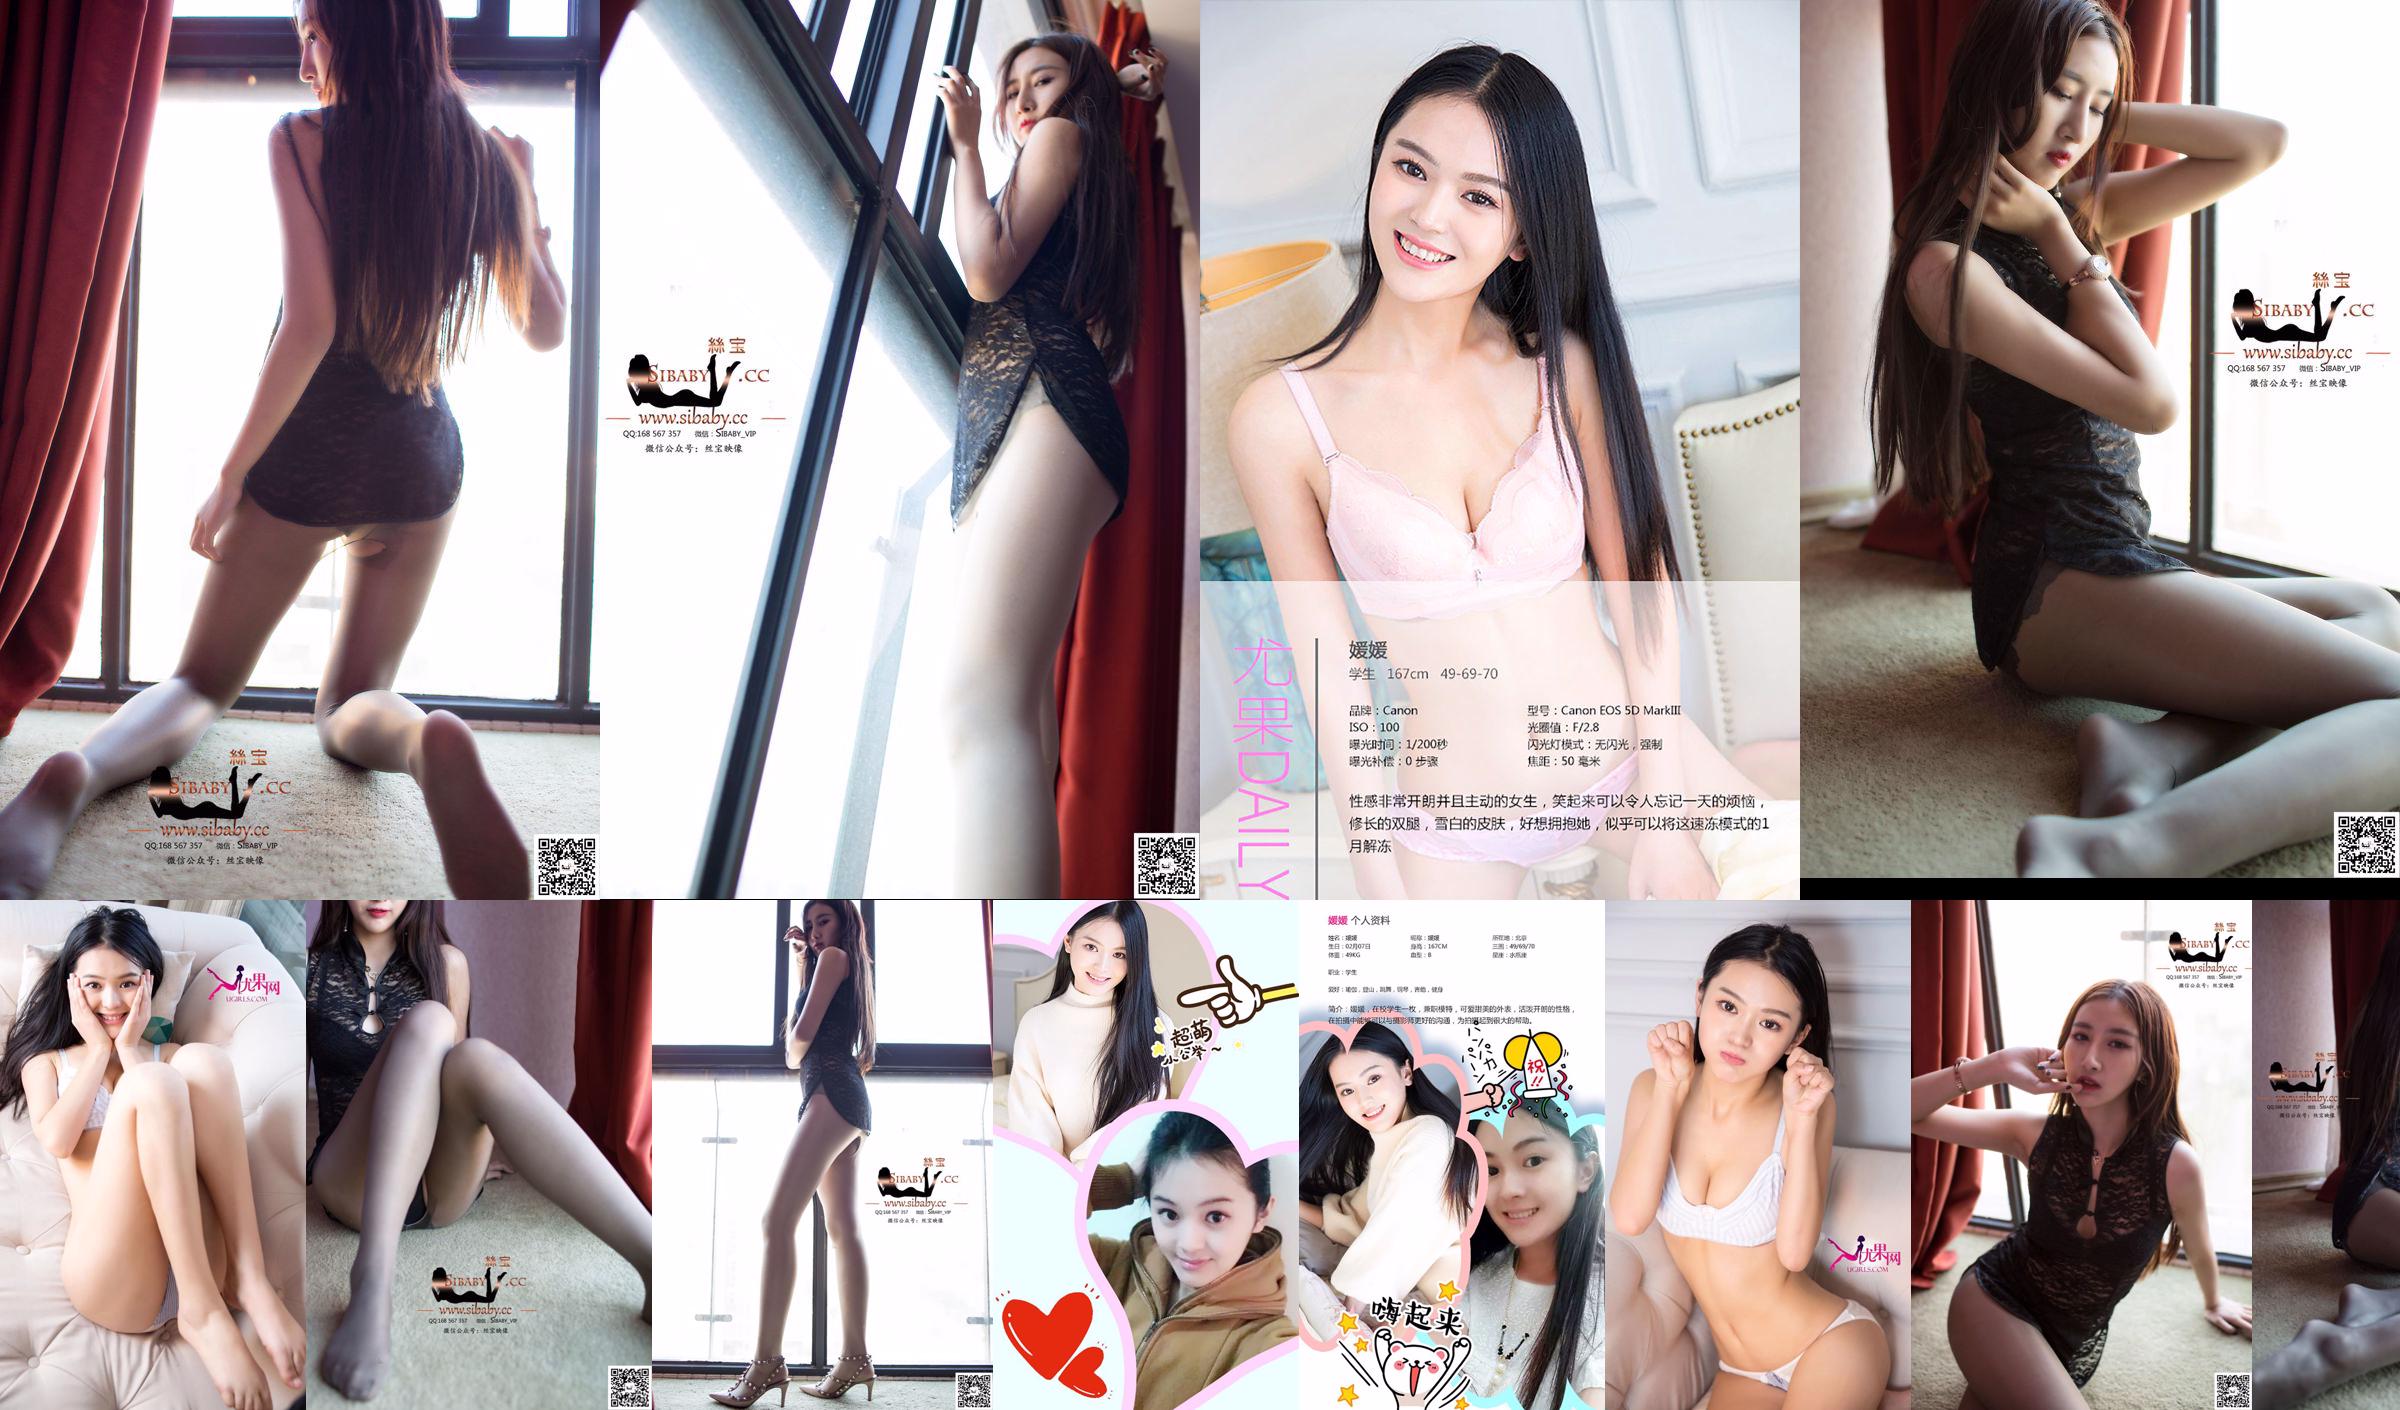 Yuanyuan "The Love I Own to You" [爱优物 Ugirls] No.251 No.644e46 หน้า 6